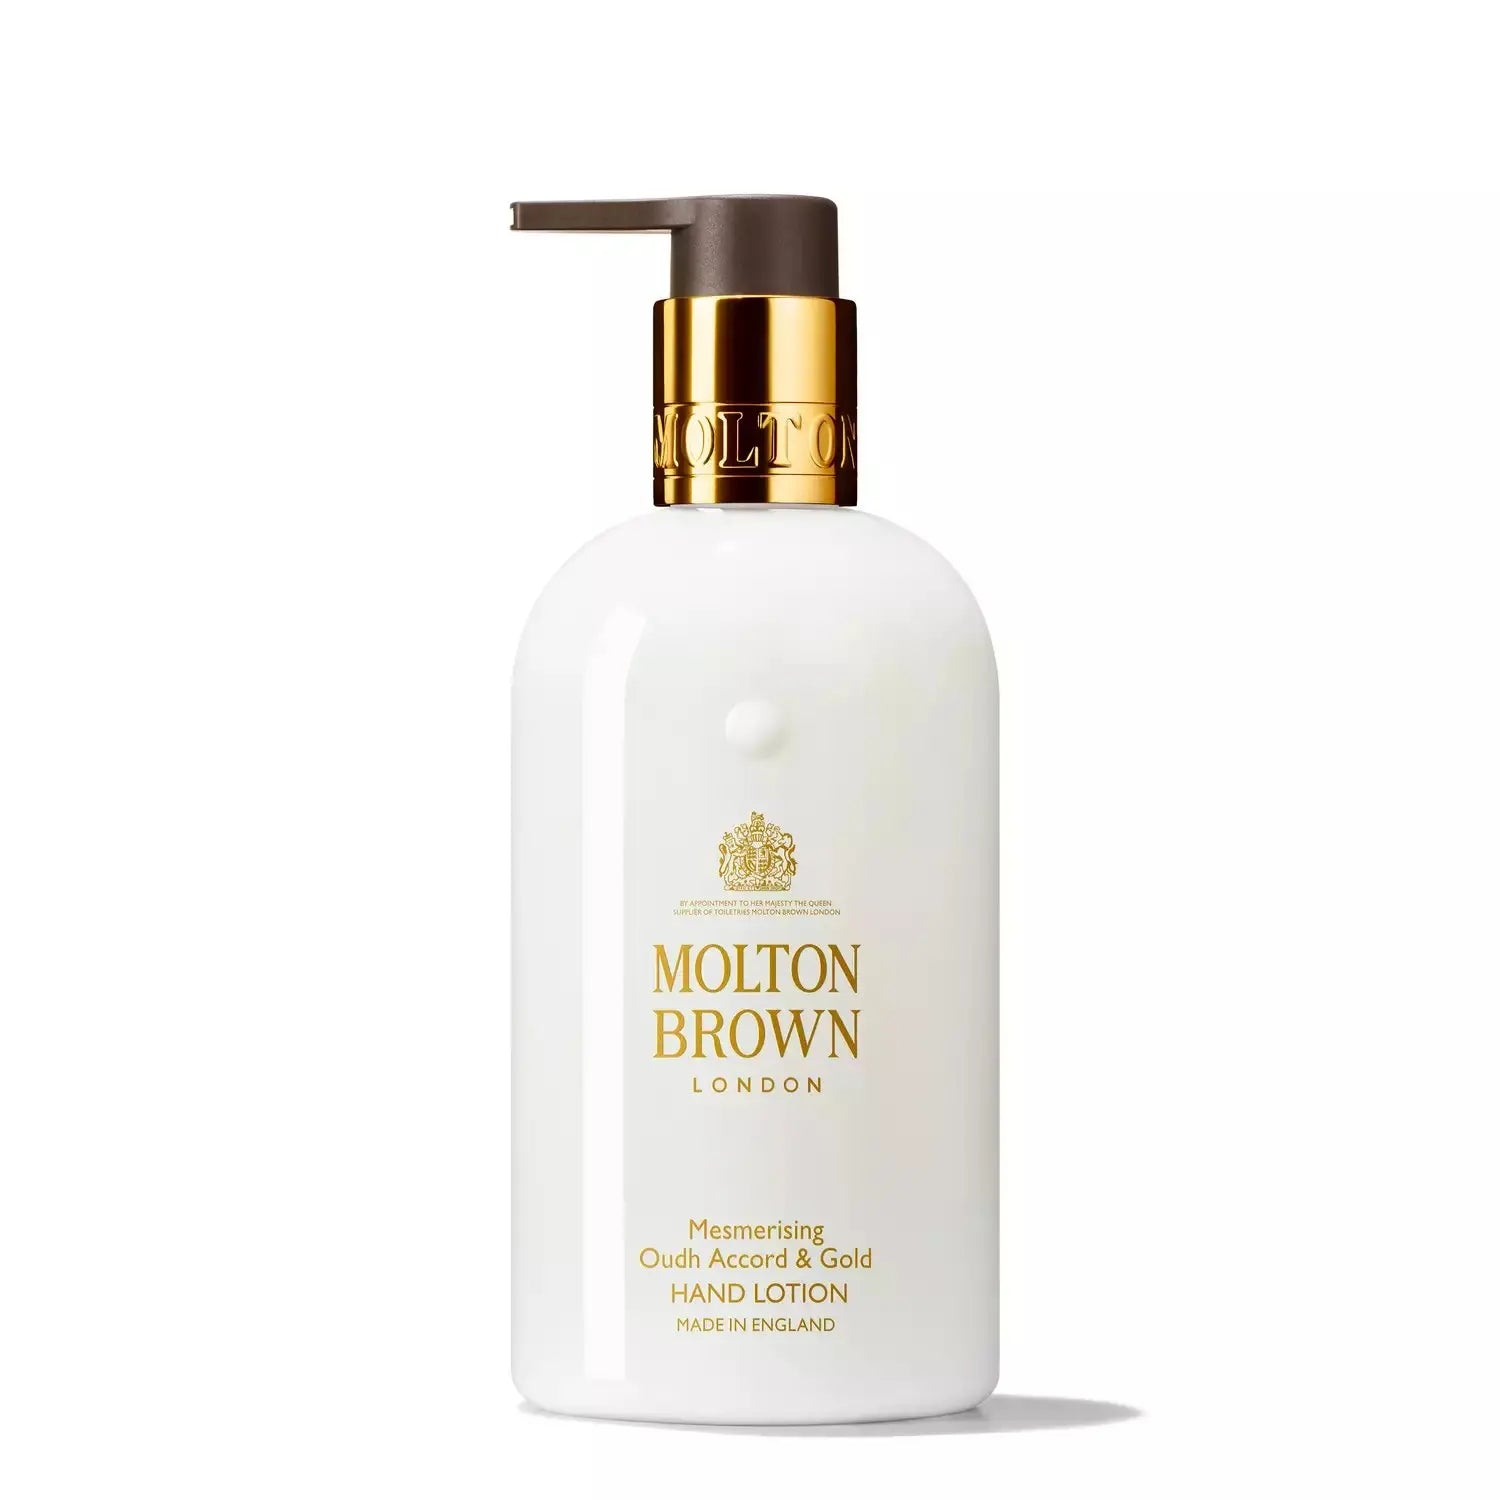 Molton Brown Mesmerizing Oudh Accord and Gold Hand Lotion